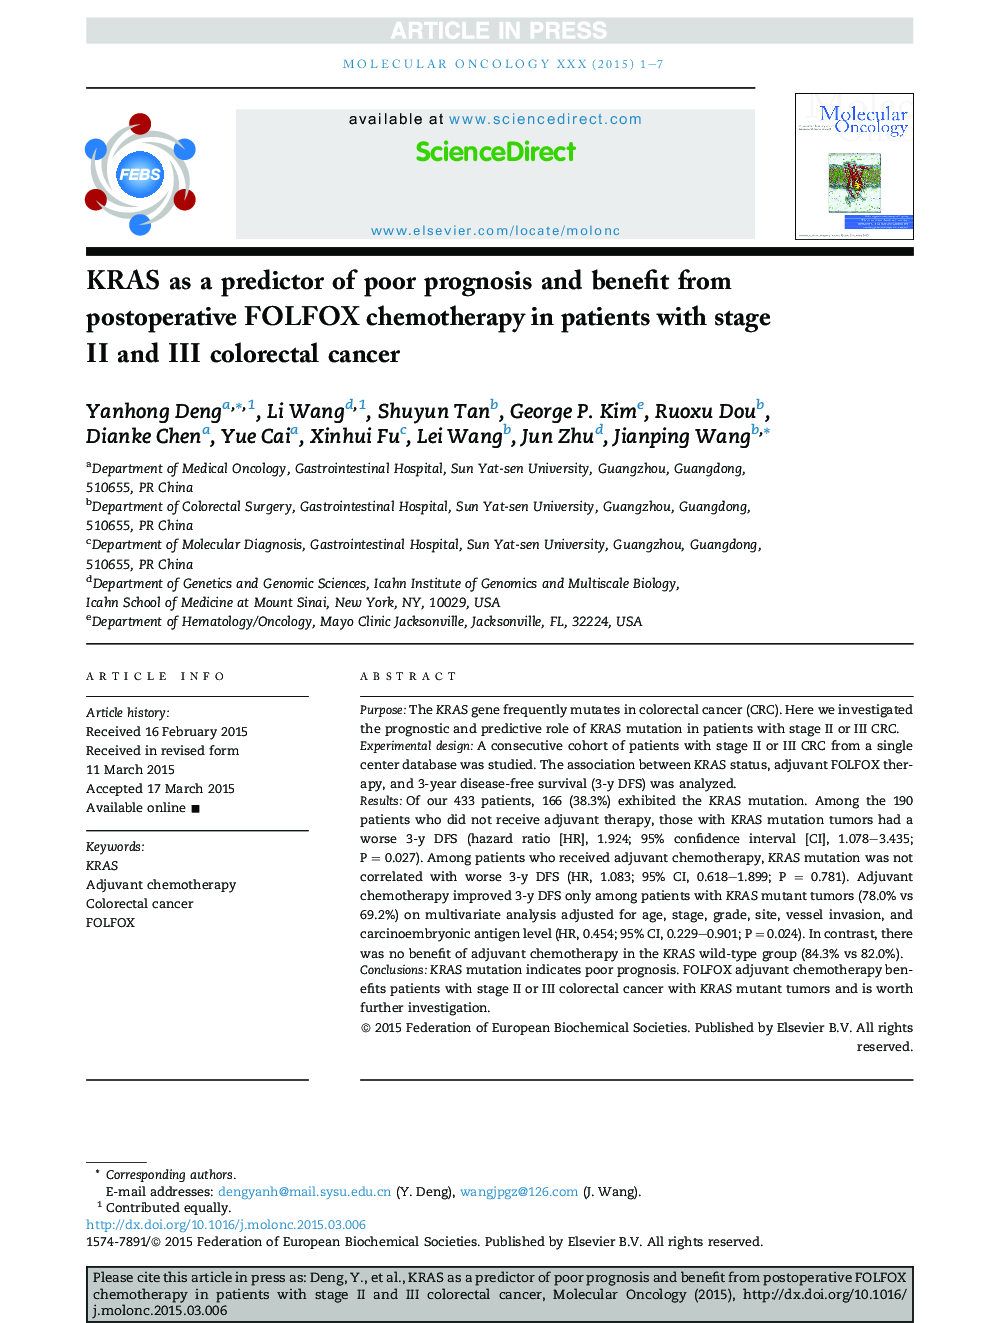 KRAS as a predictor of poor prognosis and benefit from postoperative FOLFOX chemotherapy in patients with stage II and III colorectal cancer